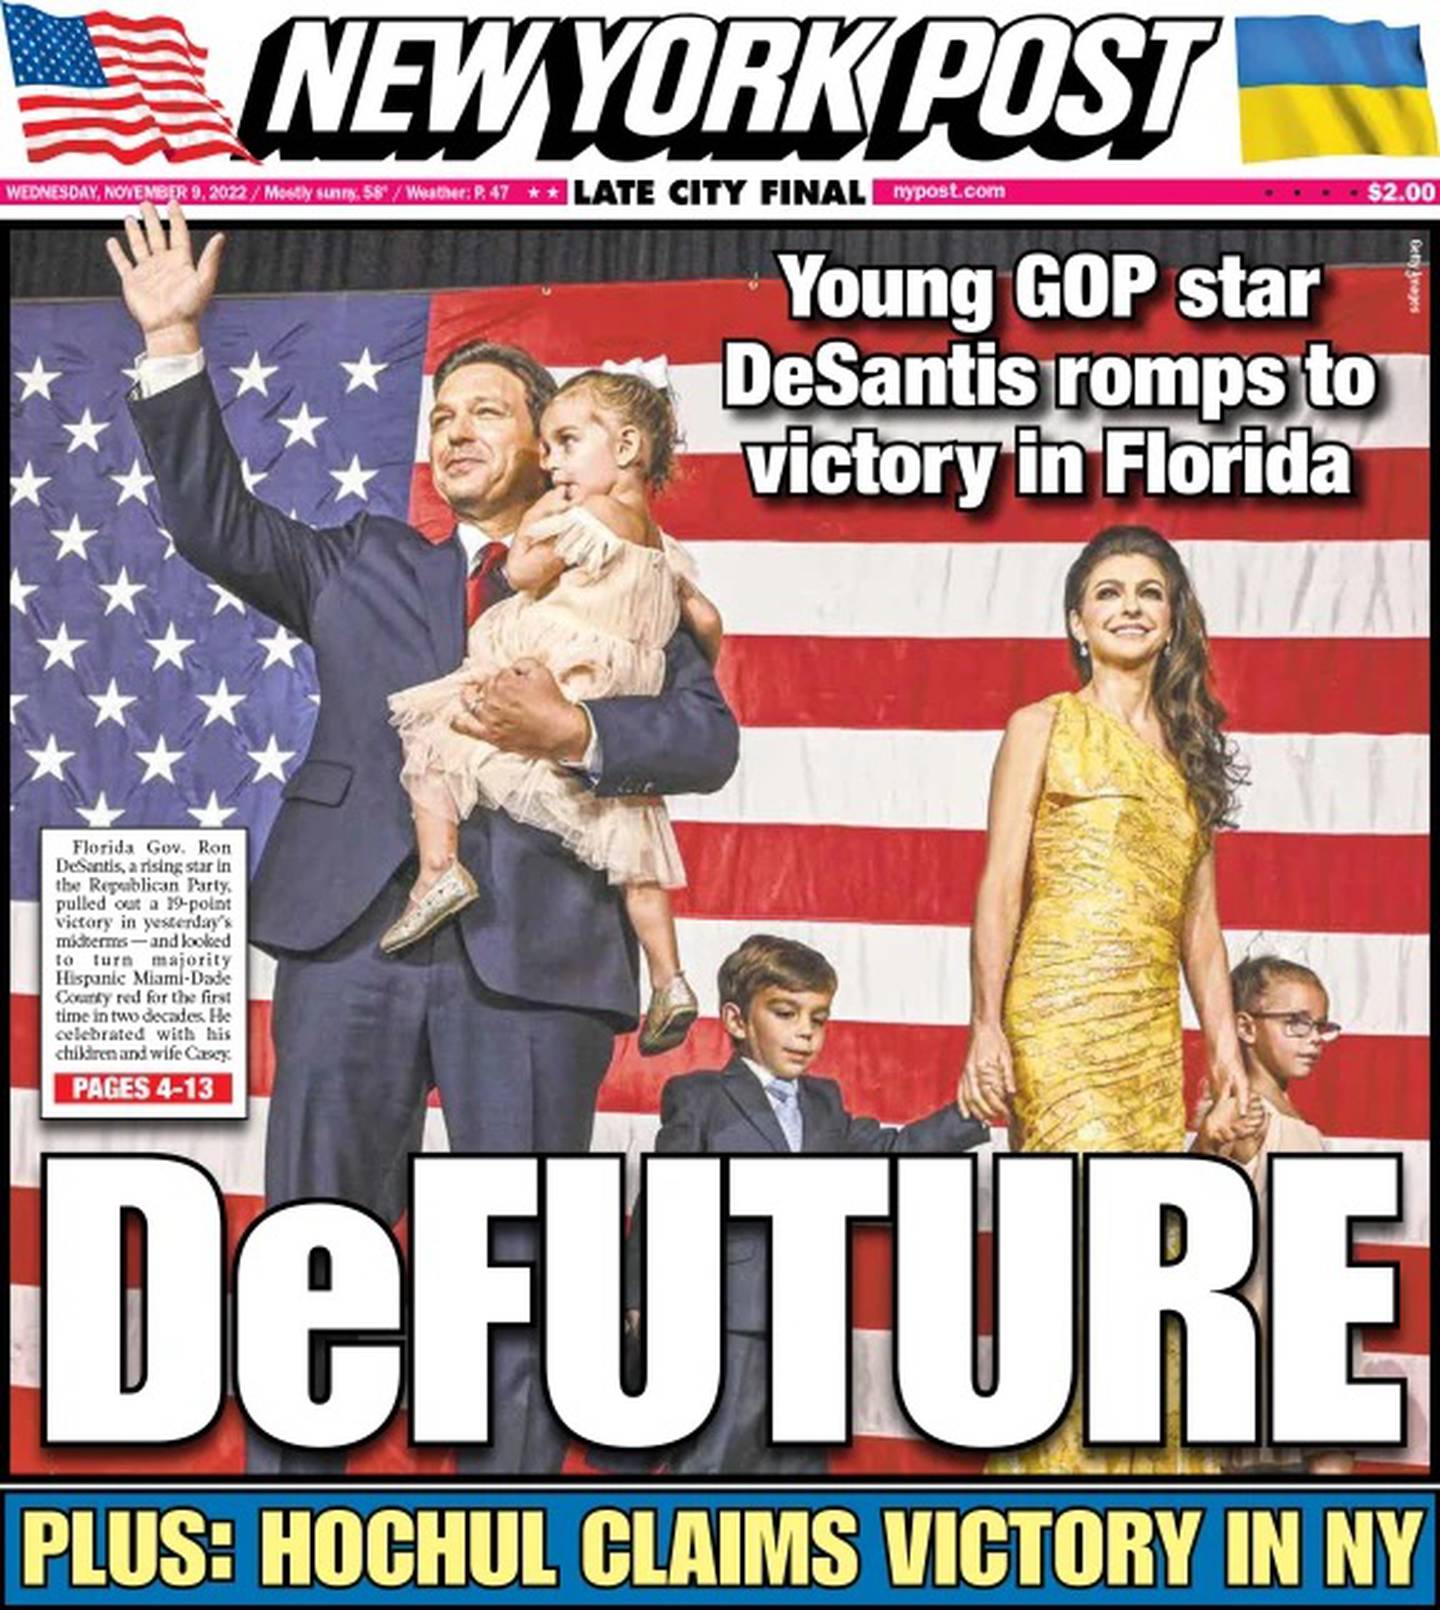 The front page of the New York Post heralds Ron DeSantis's re-election as Florida governor. Photo: Screengrab